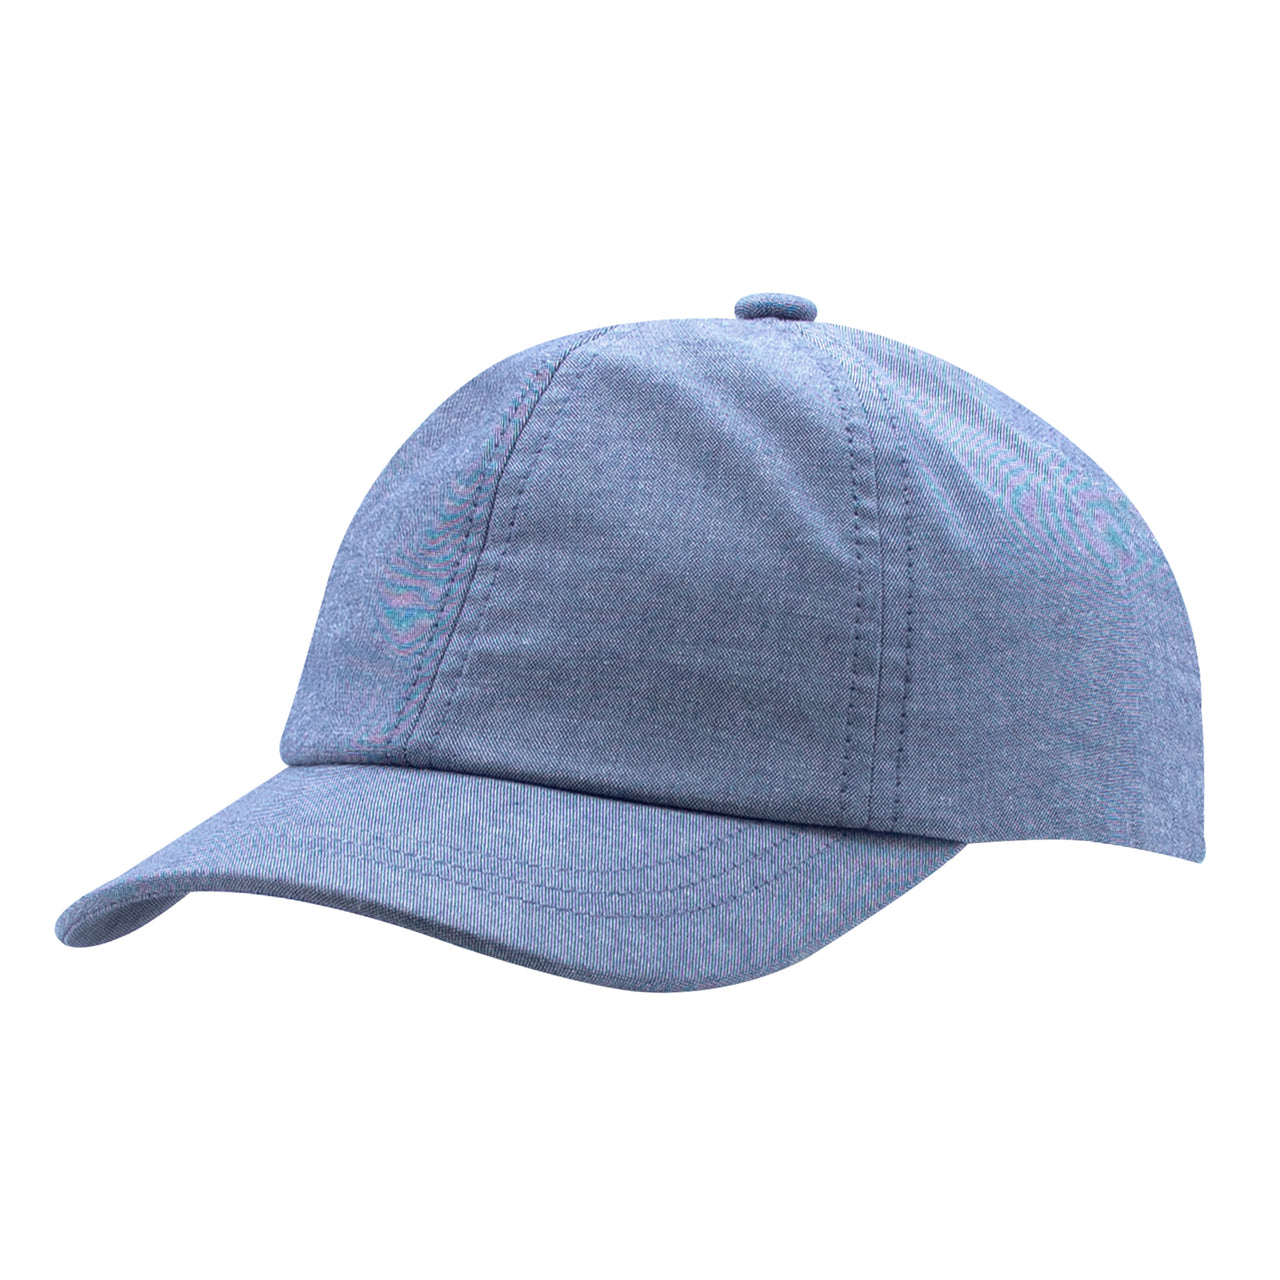 Wee Ones Chambray Ball Cap